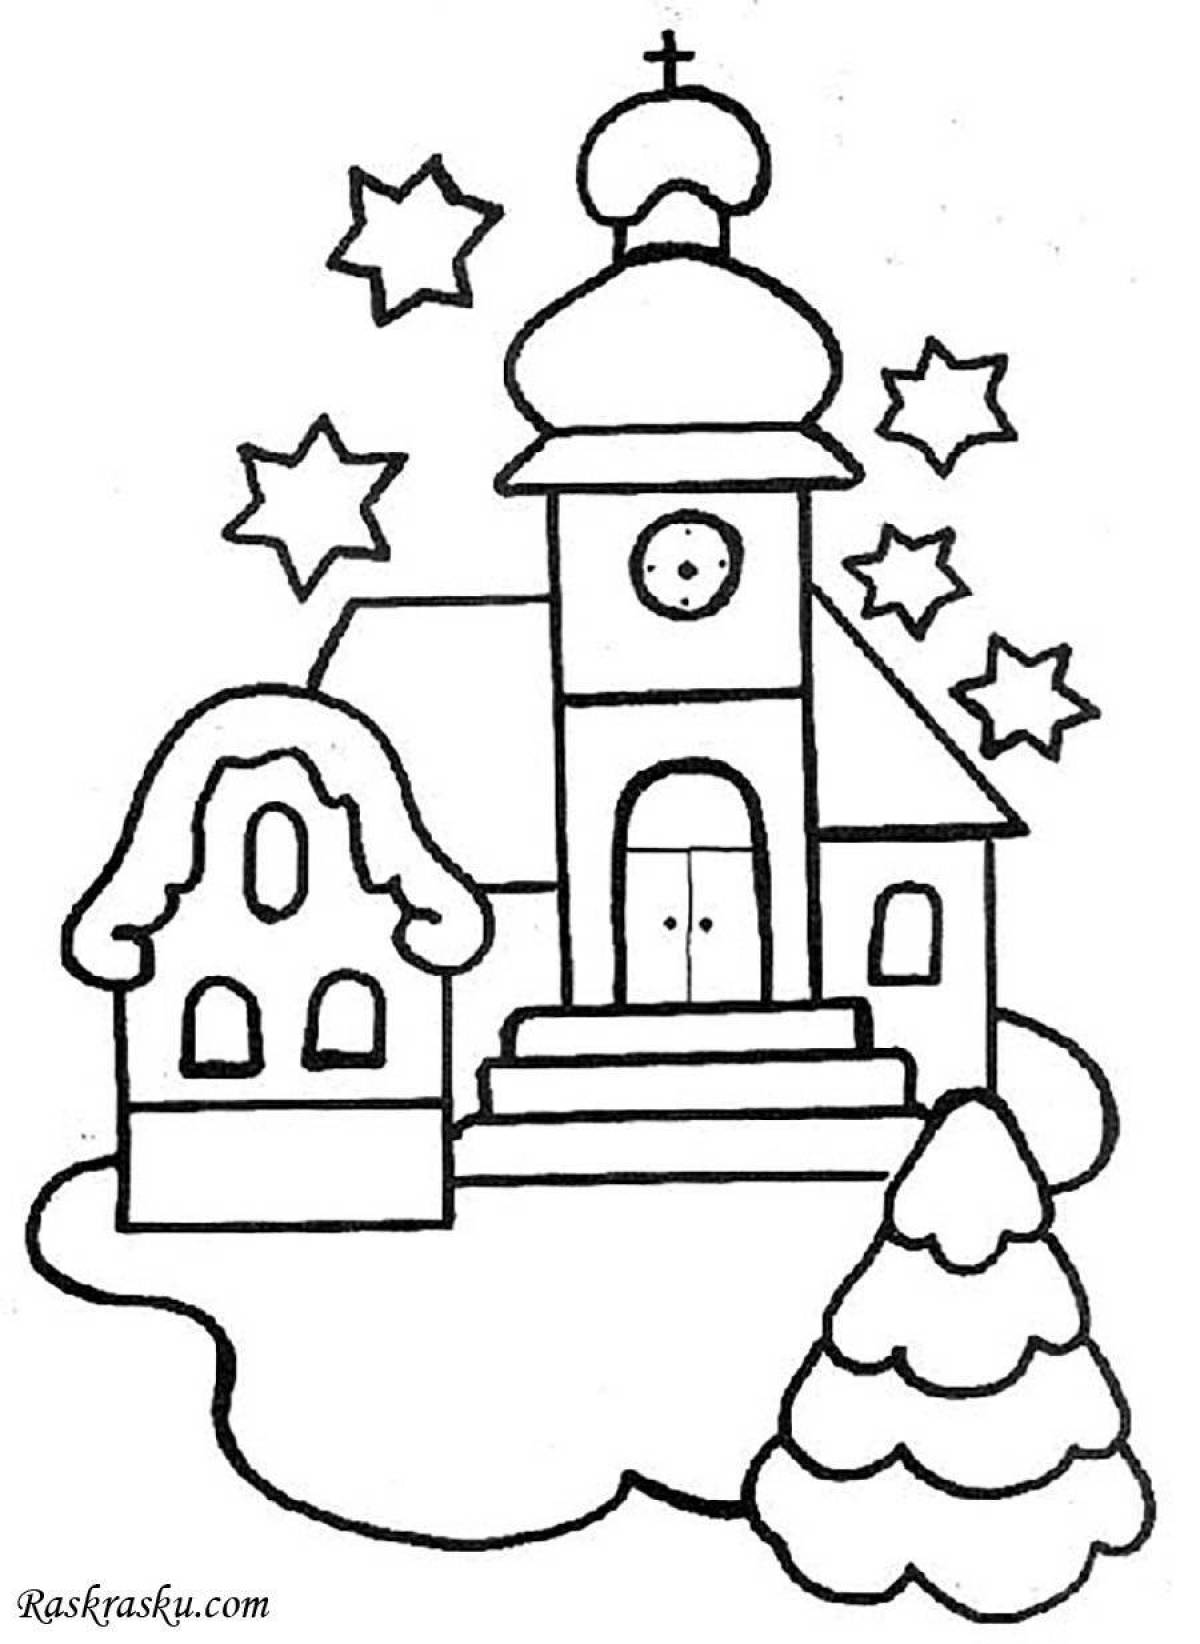 Coloring page luxury church